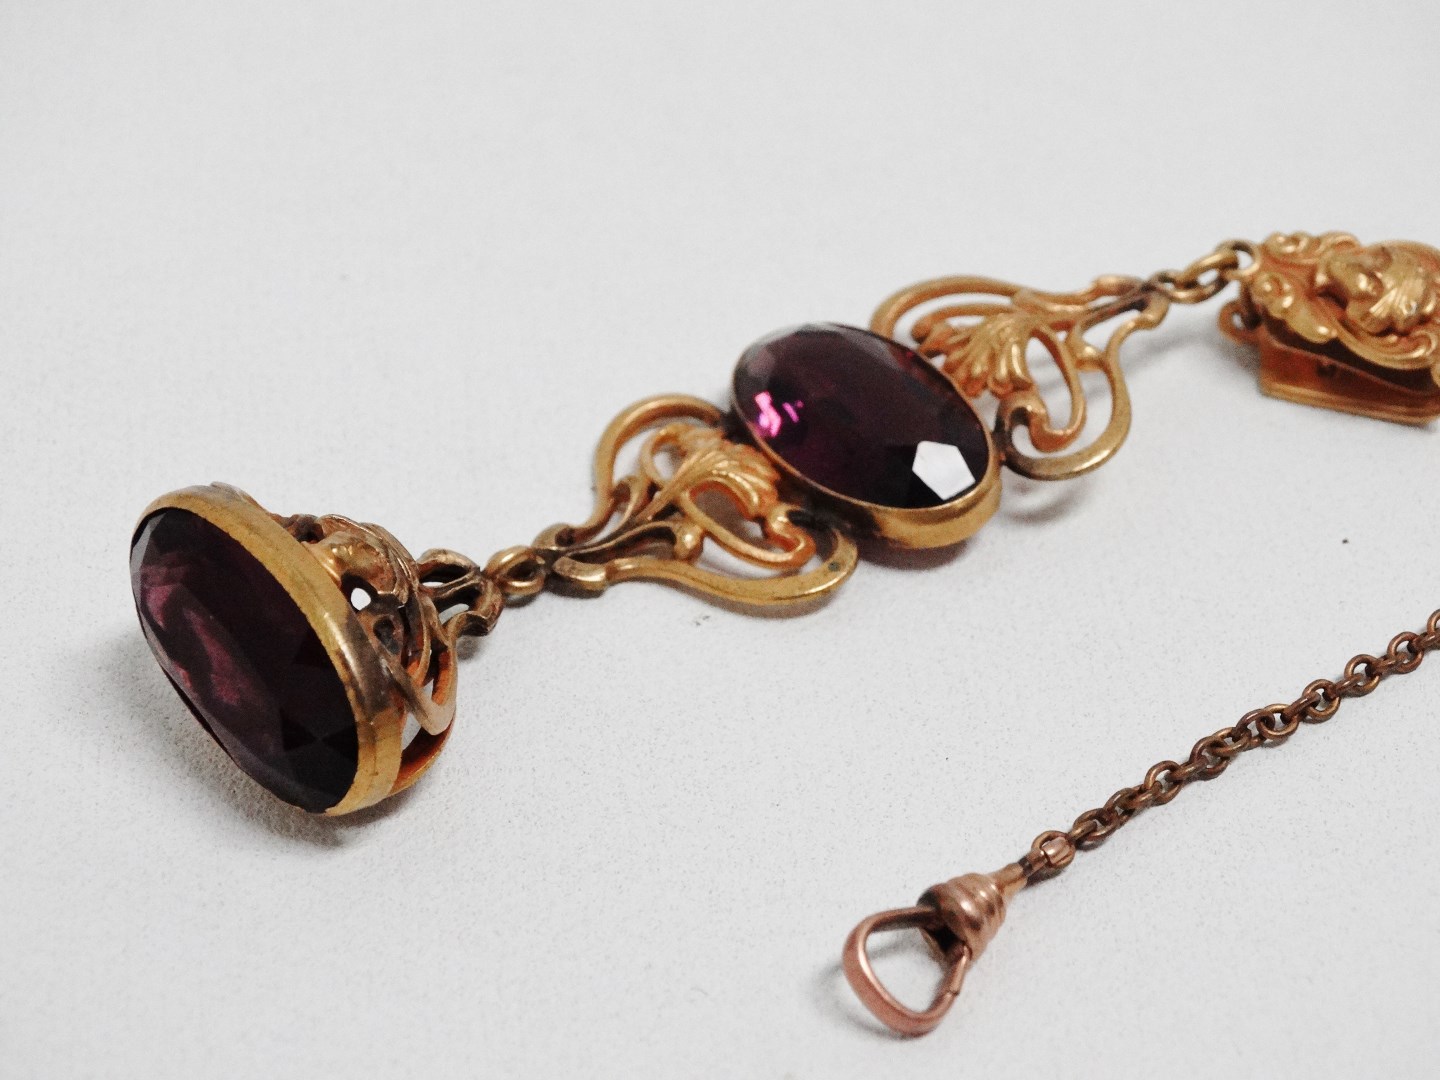 A late 19th century amethyst chatelaine type seal - set in gilt metal, length 10cm. - Image 2 of 3